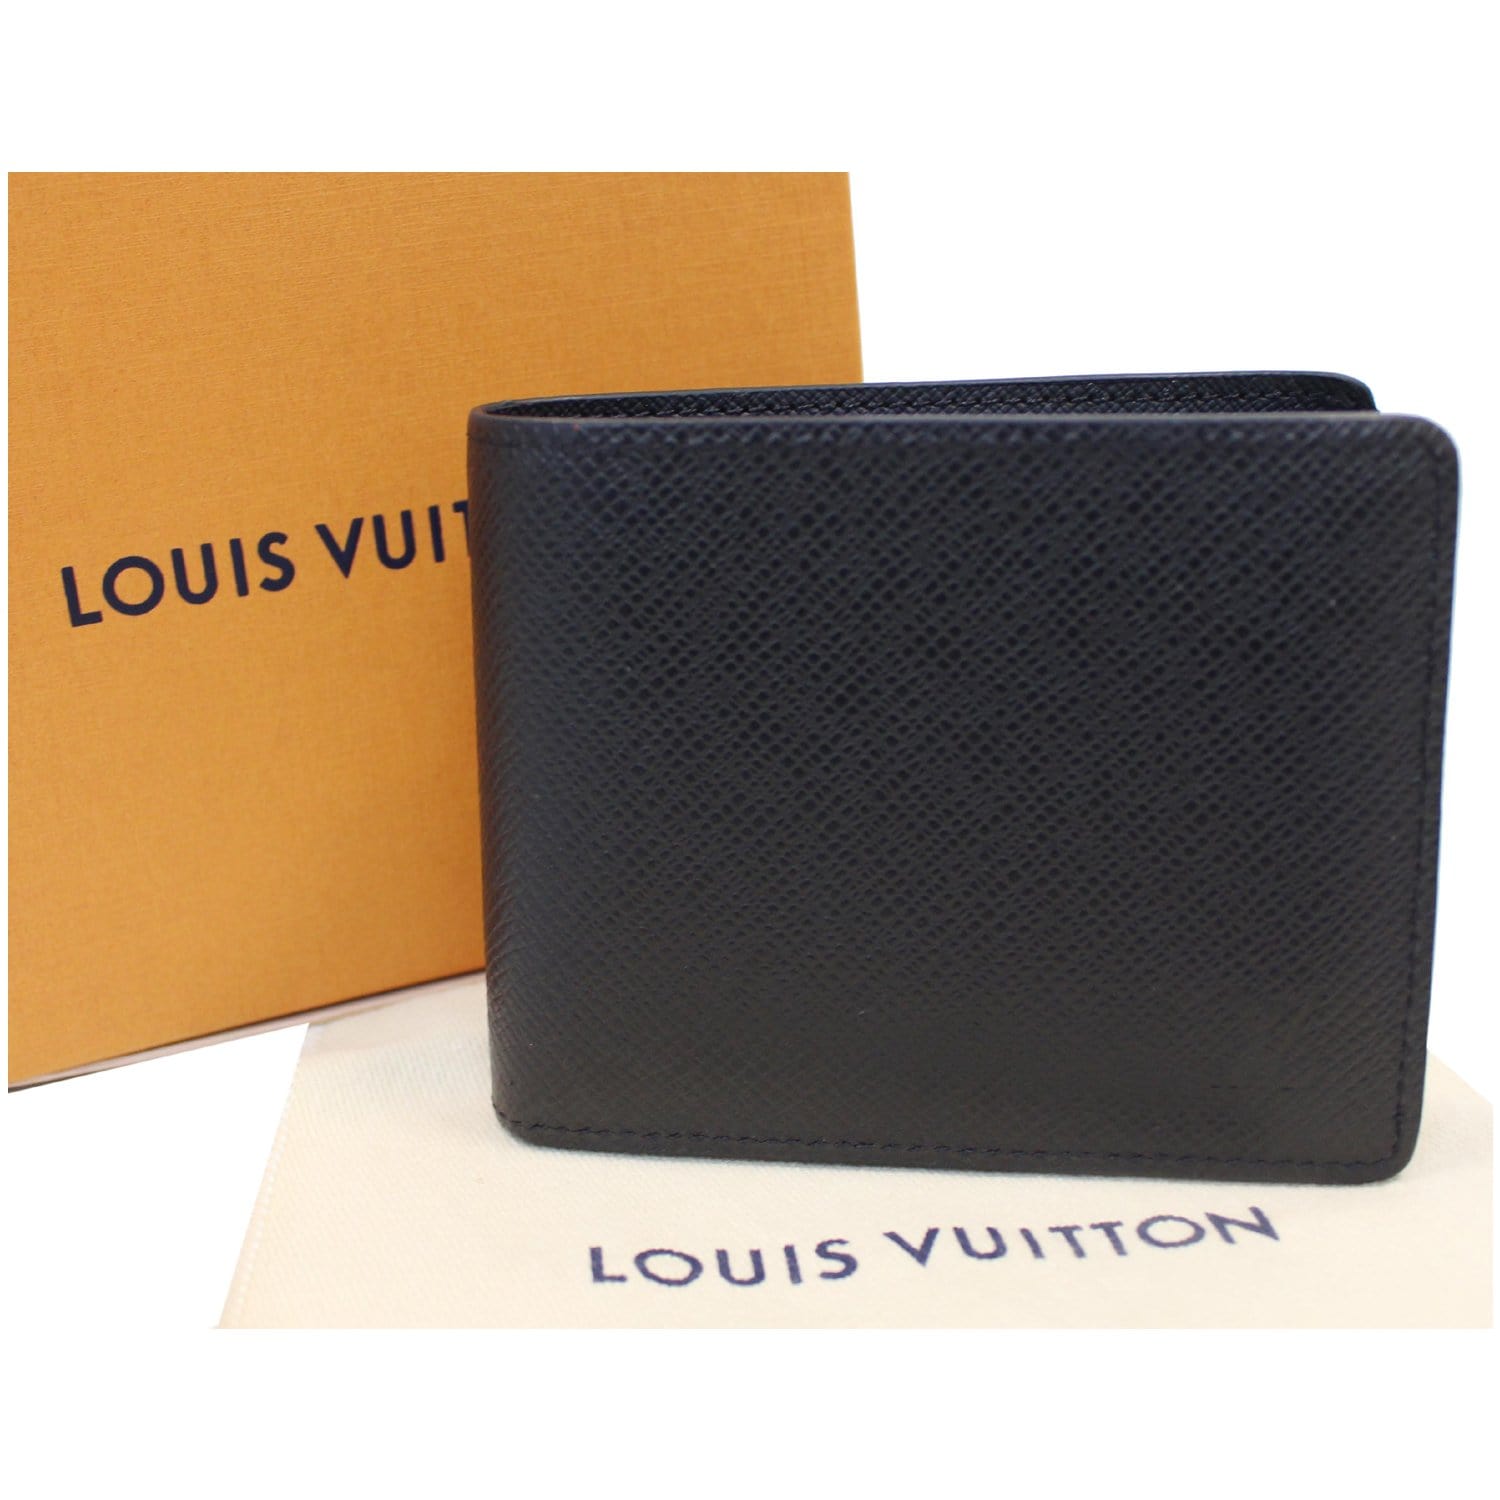 Authentic Louis Vuitton Taiga leather long wallet. 4” x 6.5” when